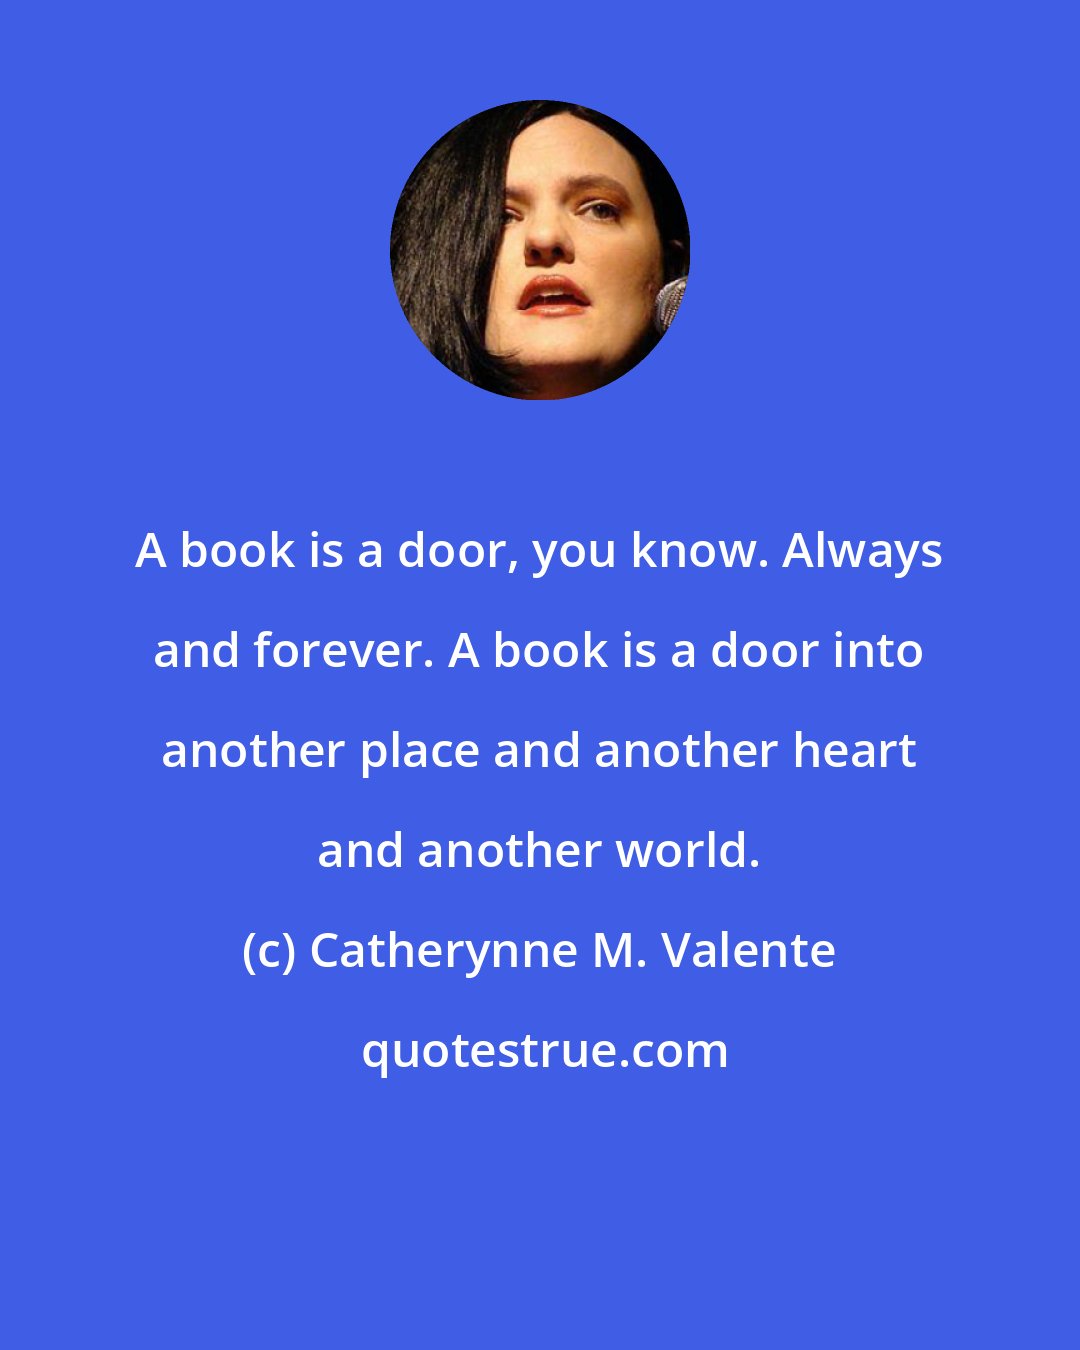 Catherynne M. Valente: A book is a door, you know. Always and forever. A book is a door into another place and another heart and another world.